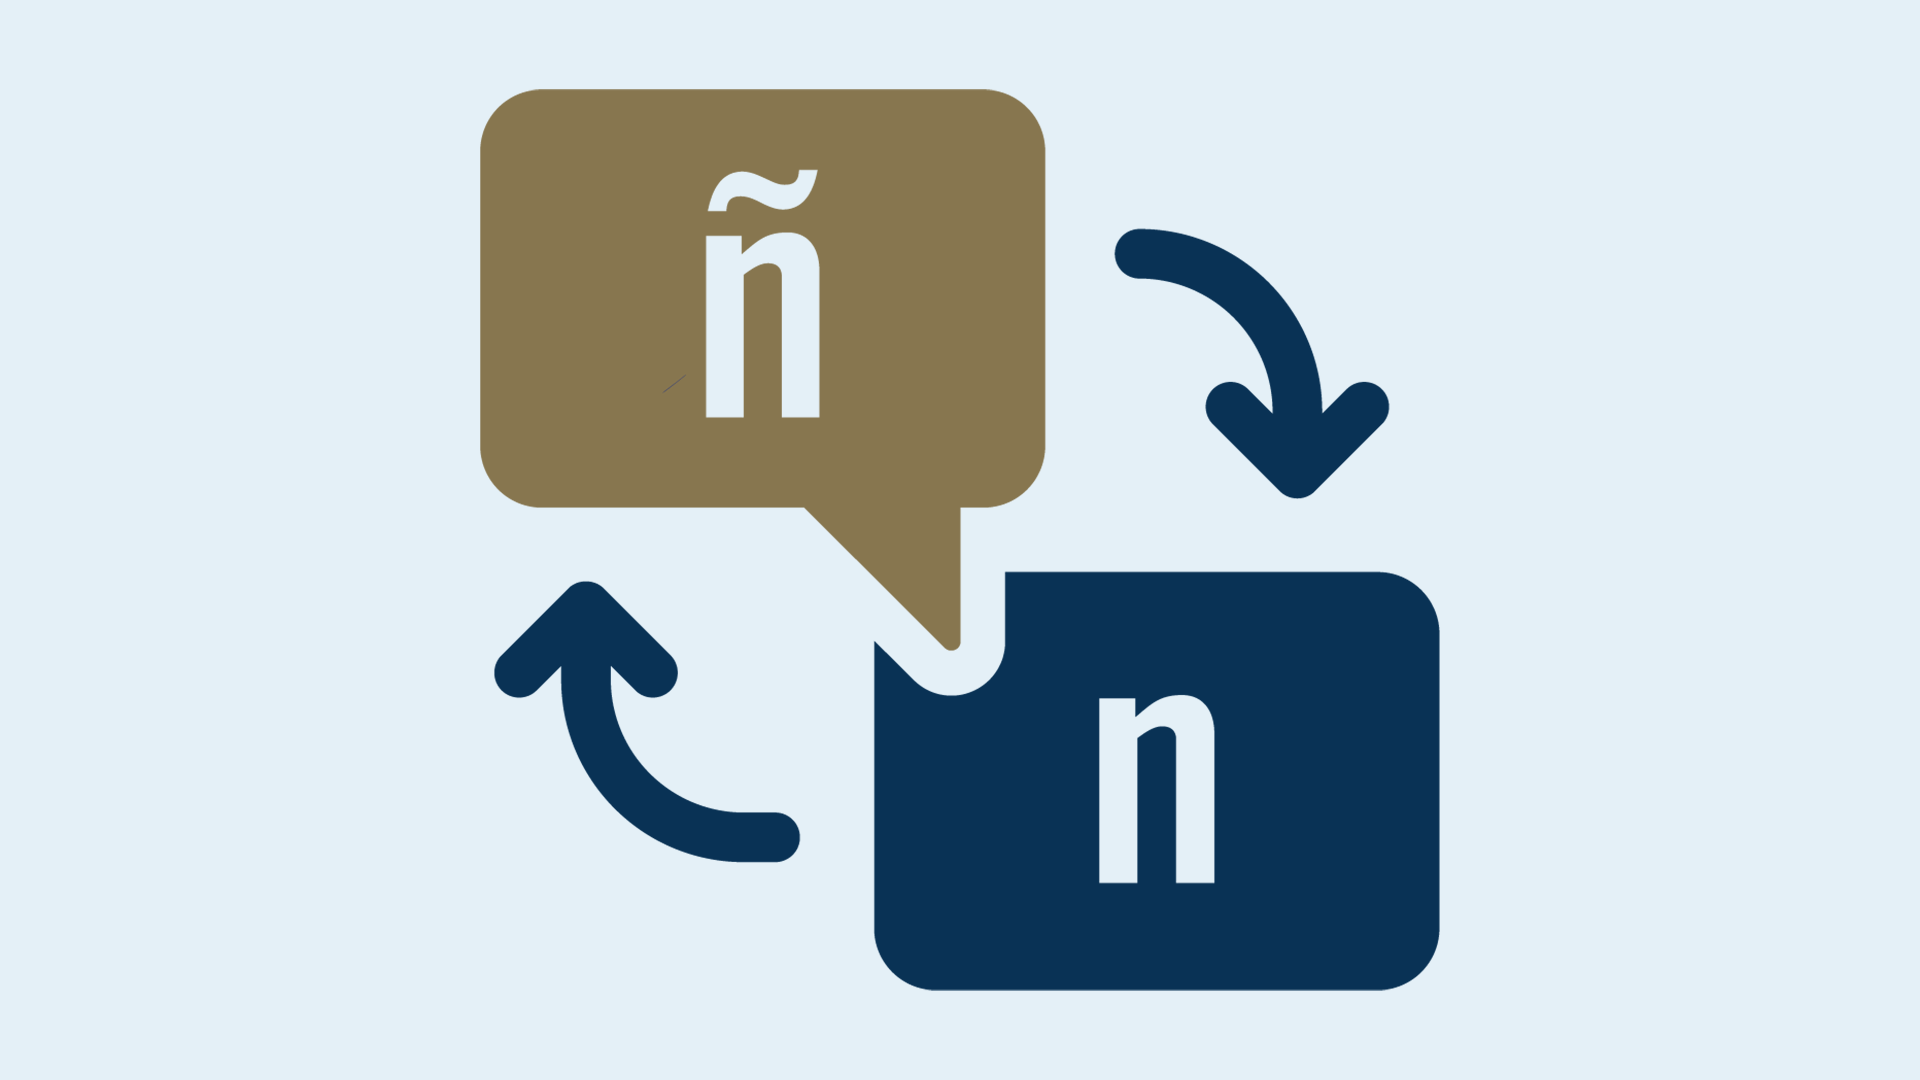 Spanish translation from ñ to n icon